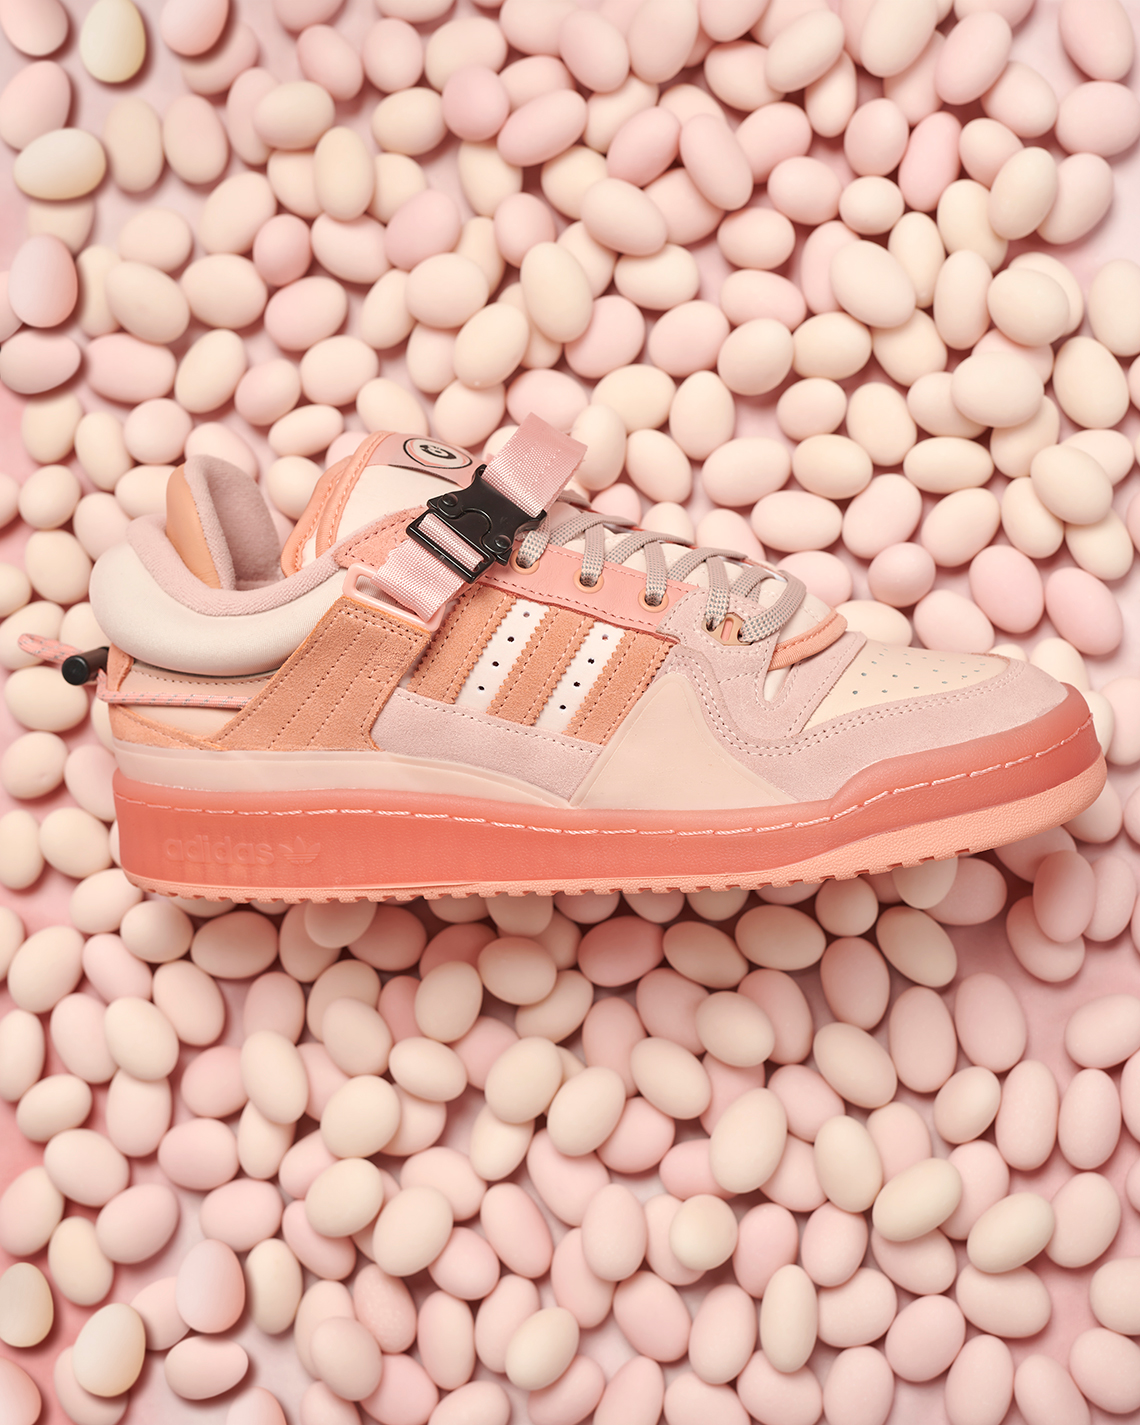 Bad Bunny Adidas boot Pink Shoes Release Date 3